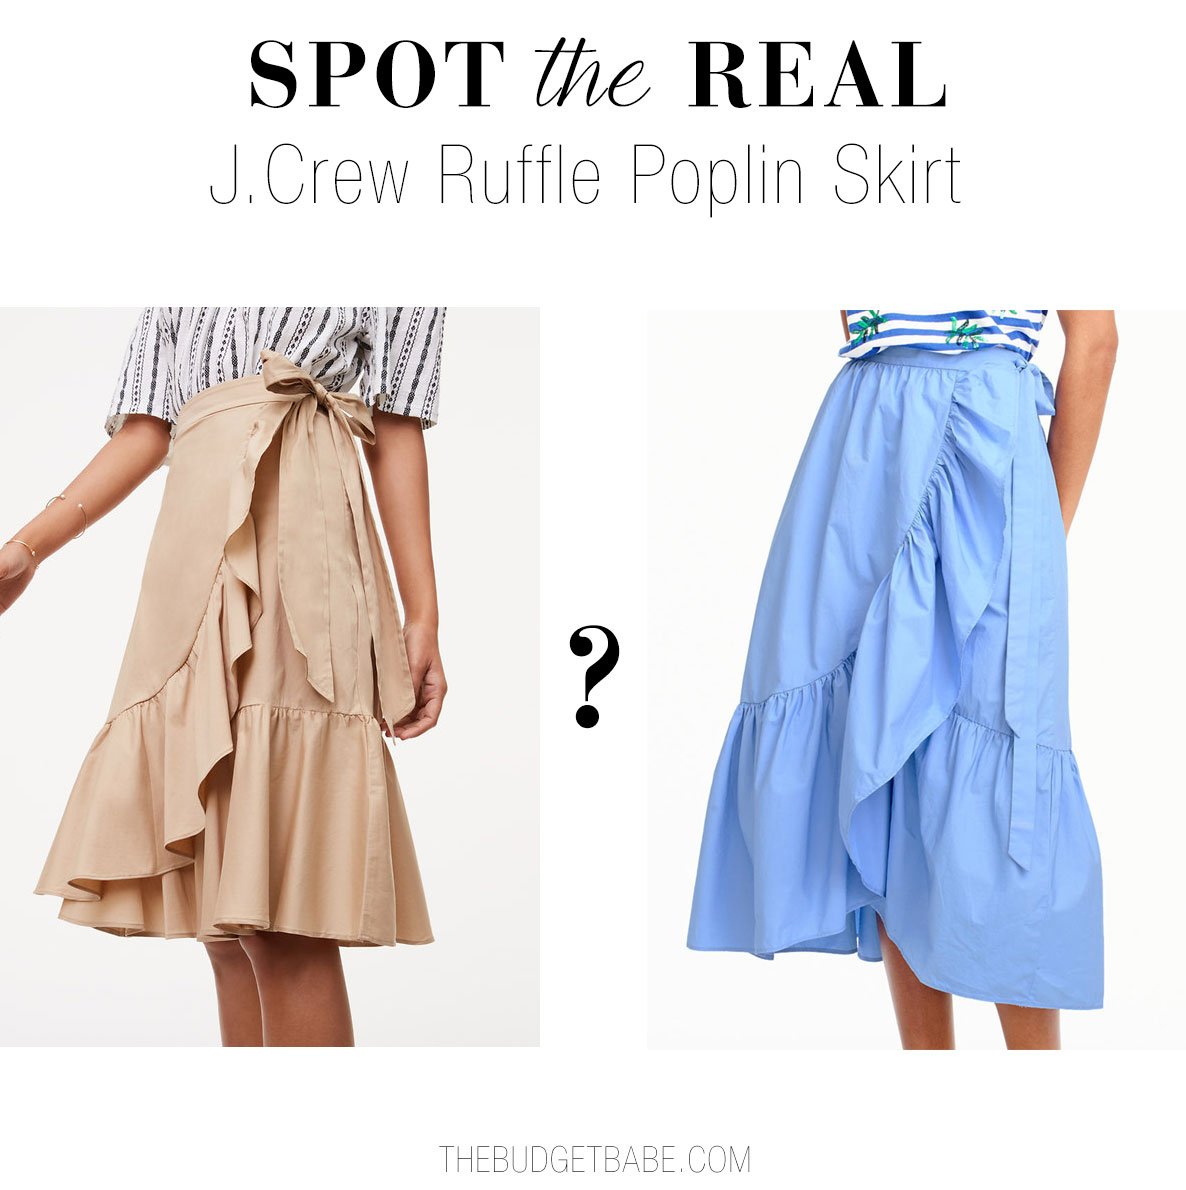 Can you guess which is the real J.Crew ruffled cotton poplin skirt?